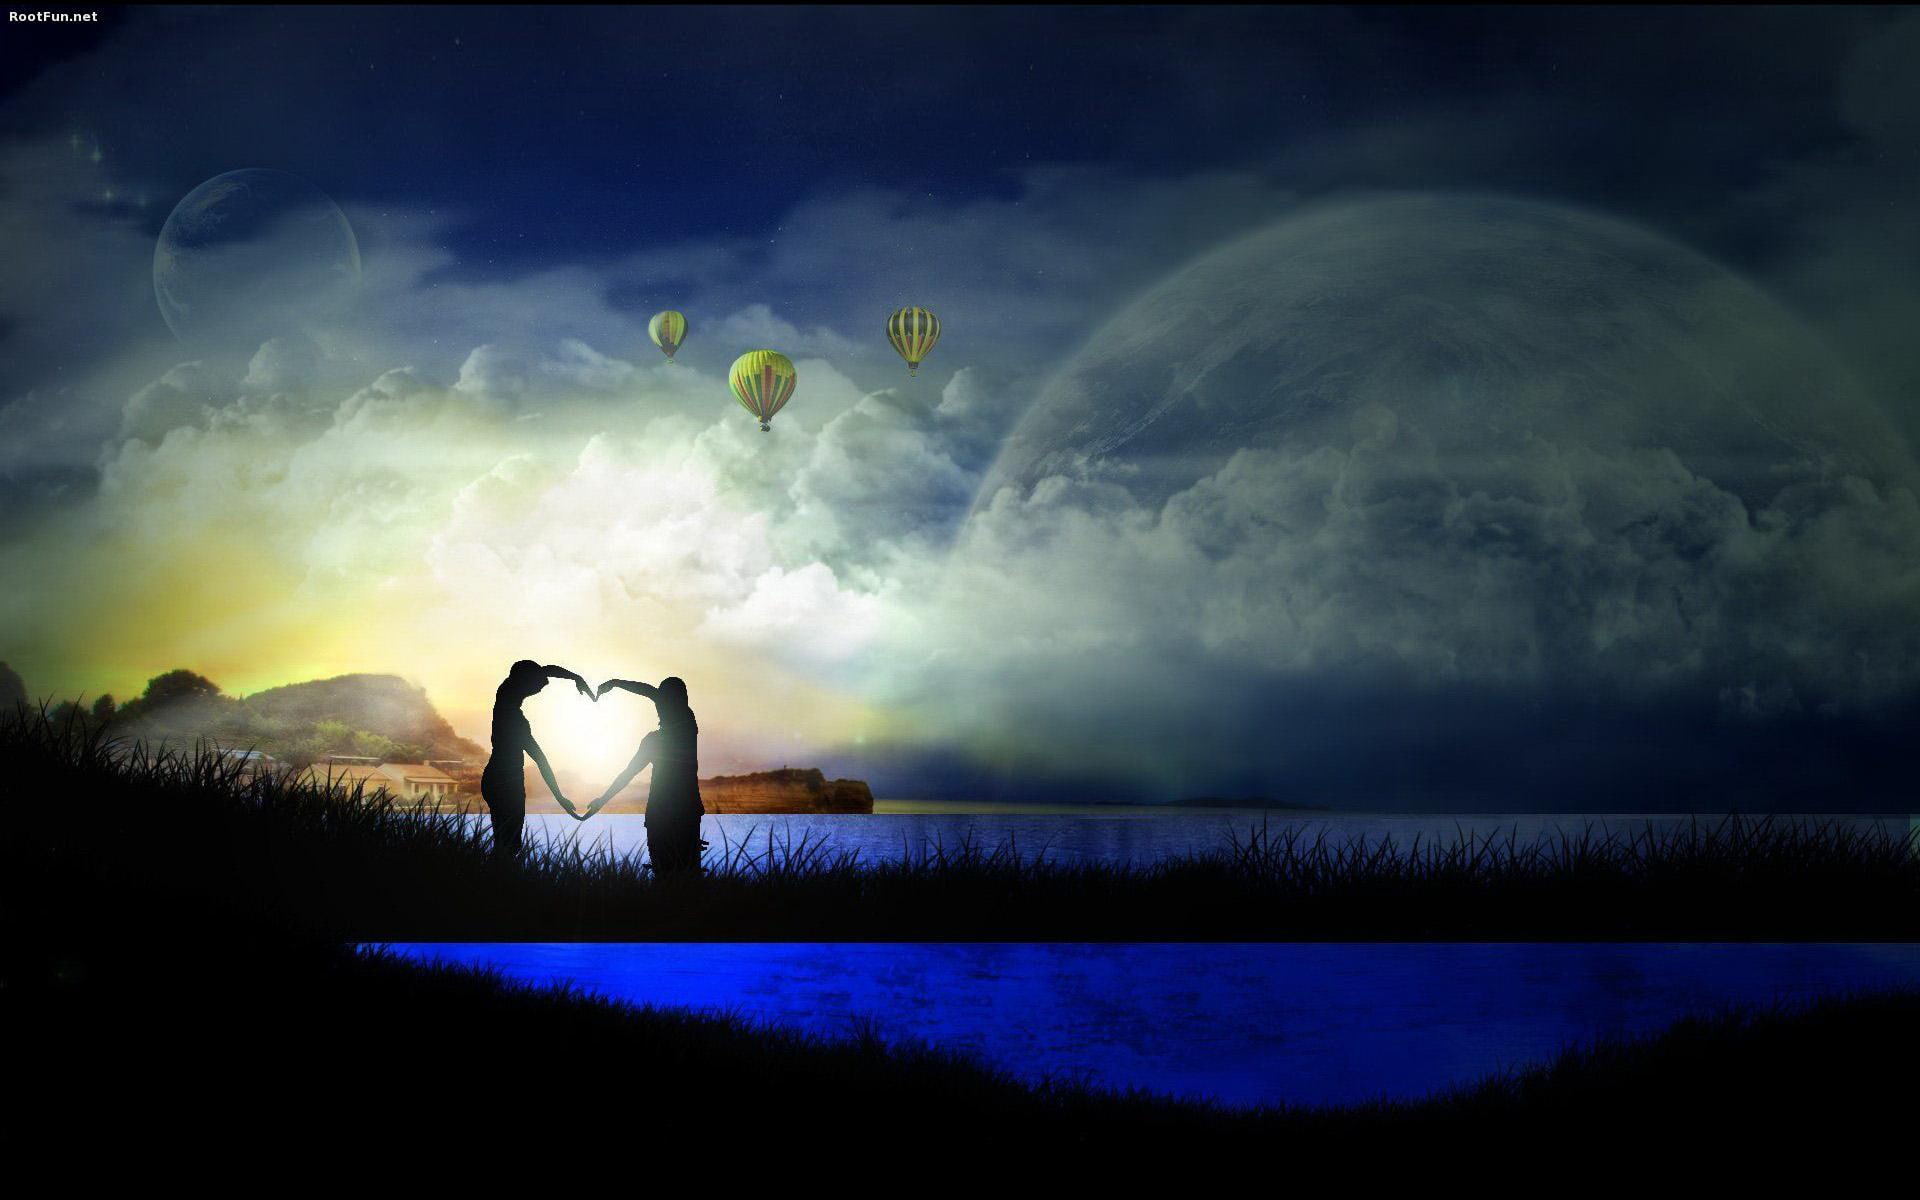 Romantic Couple Photo, three hot air balloons and silhouette of couple forming heart